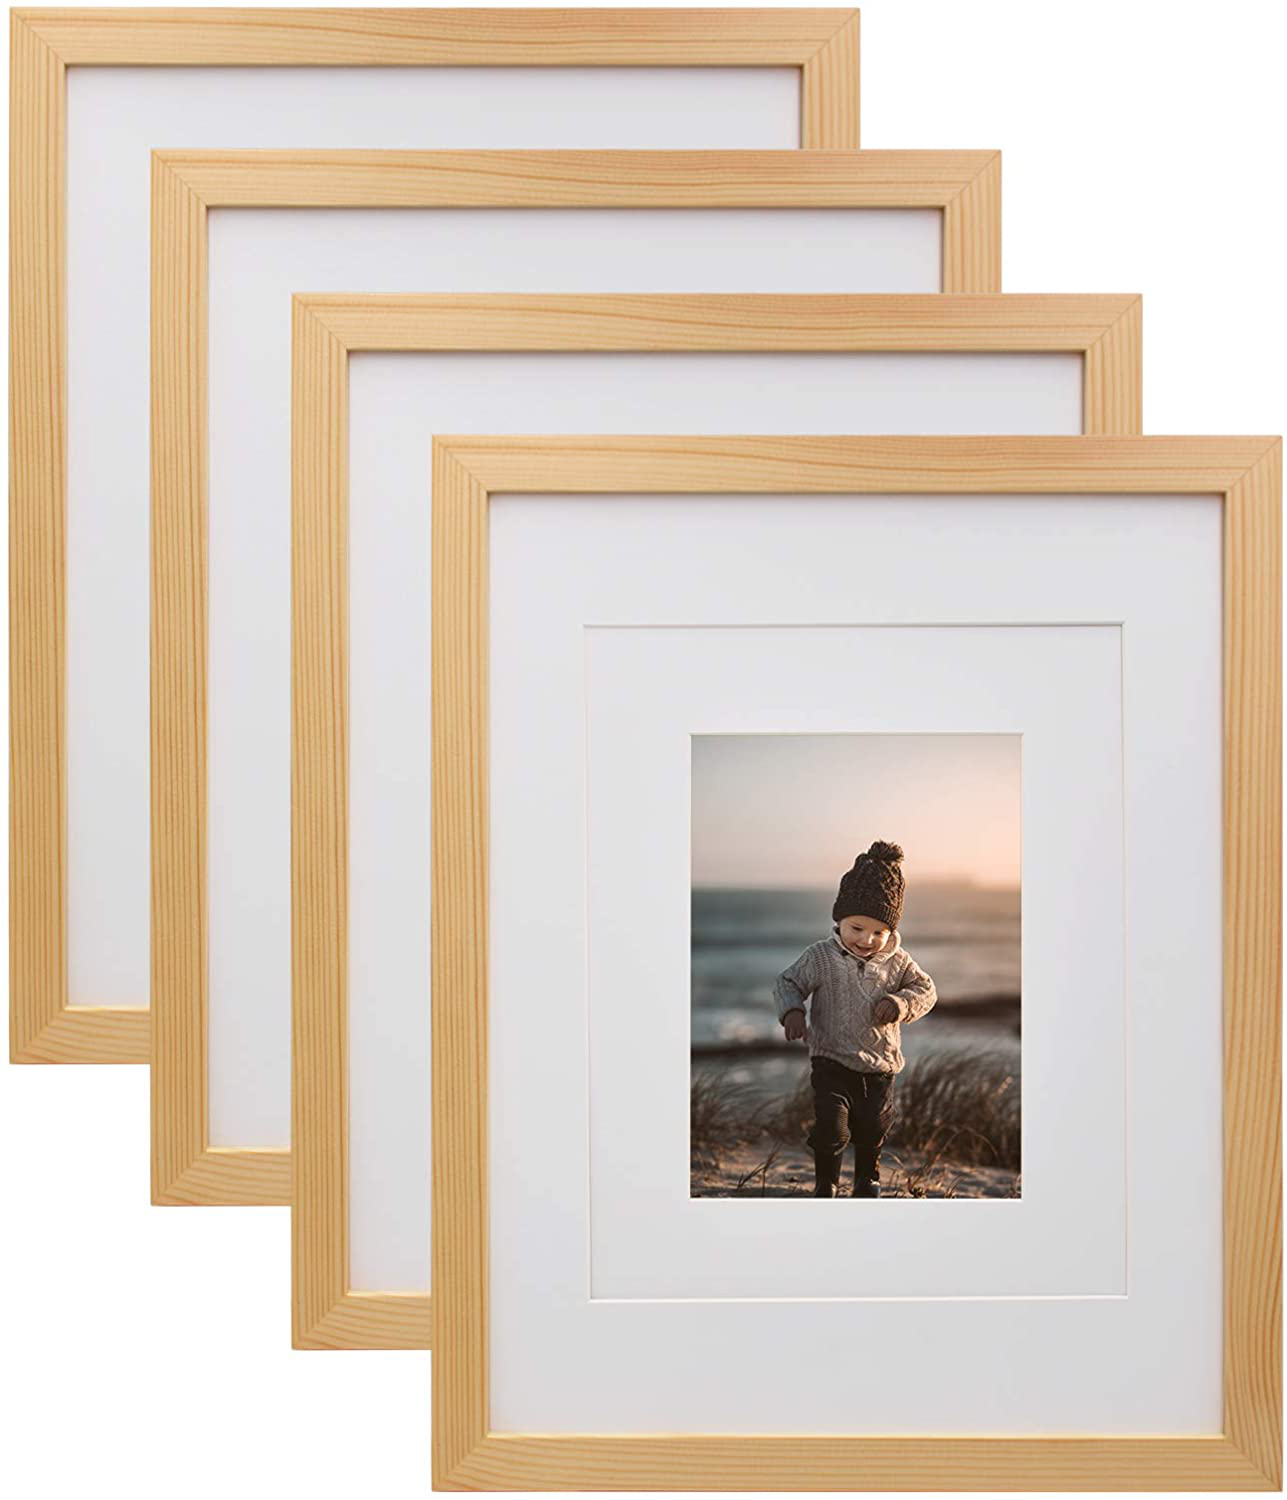 KINLINK 8x10 Picture Frames Natural Wood Frames with Acrylic Plexiglass for Pictures 4x6/5x7 with Mat or 8x10 Without Mat, Tabletop and Wall Mounting Display, Set of 4